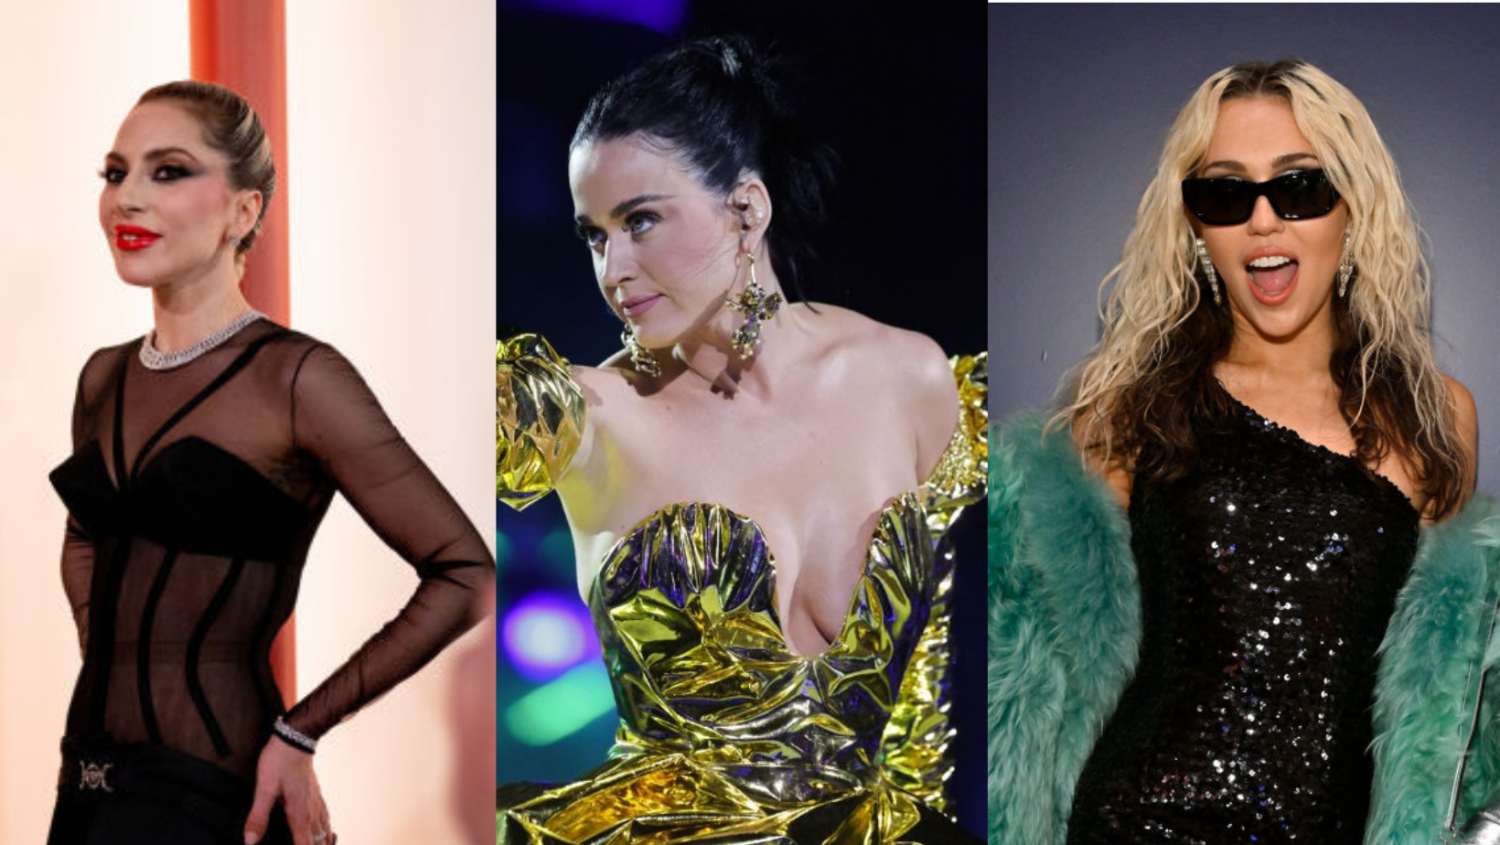 Lady Gaga, Katy Perry Rumored Headliners  For Super Bowl Halftime Show Next Year, But Fans Want Miley Cyrus